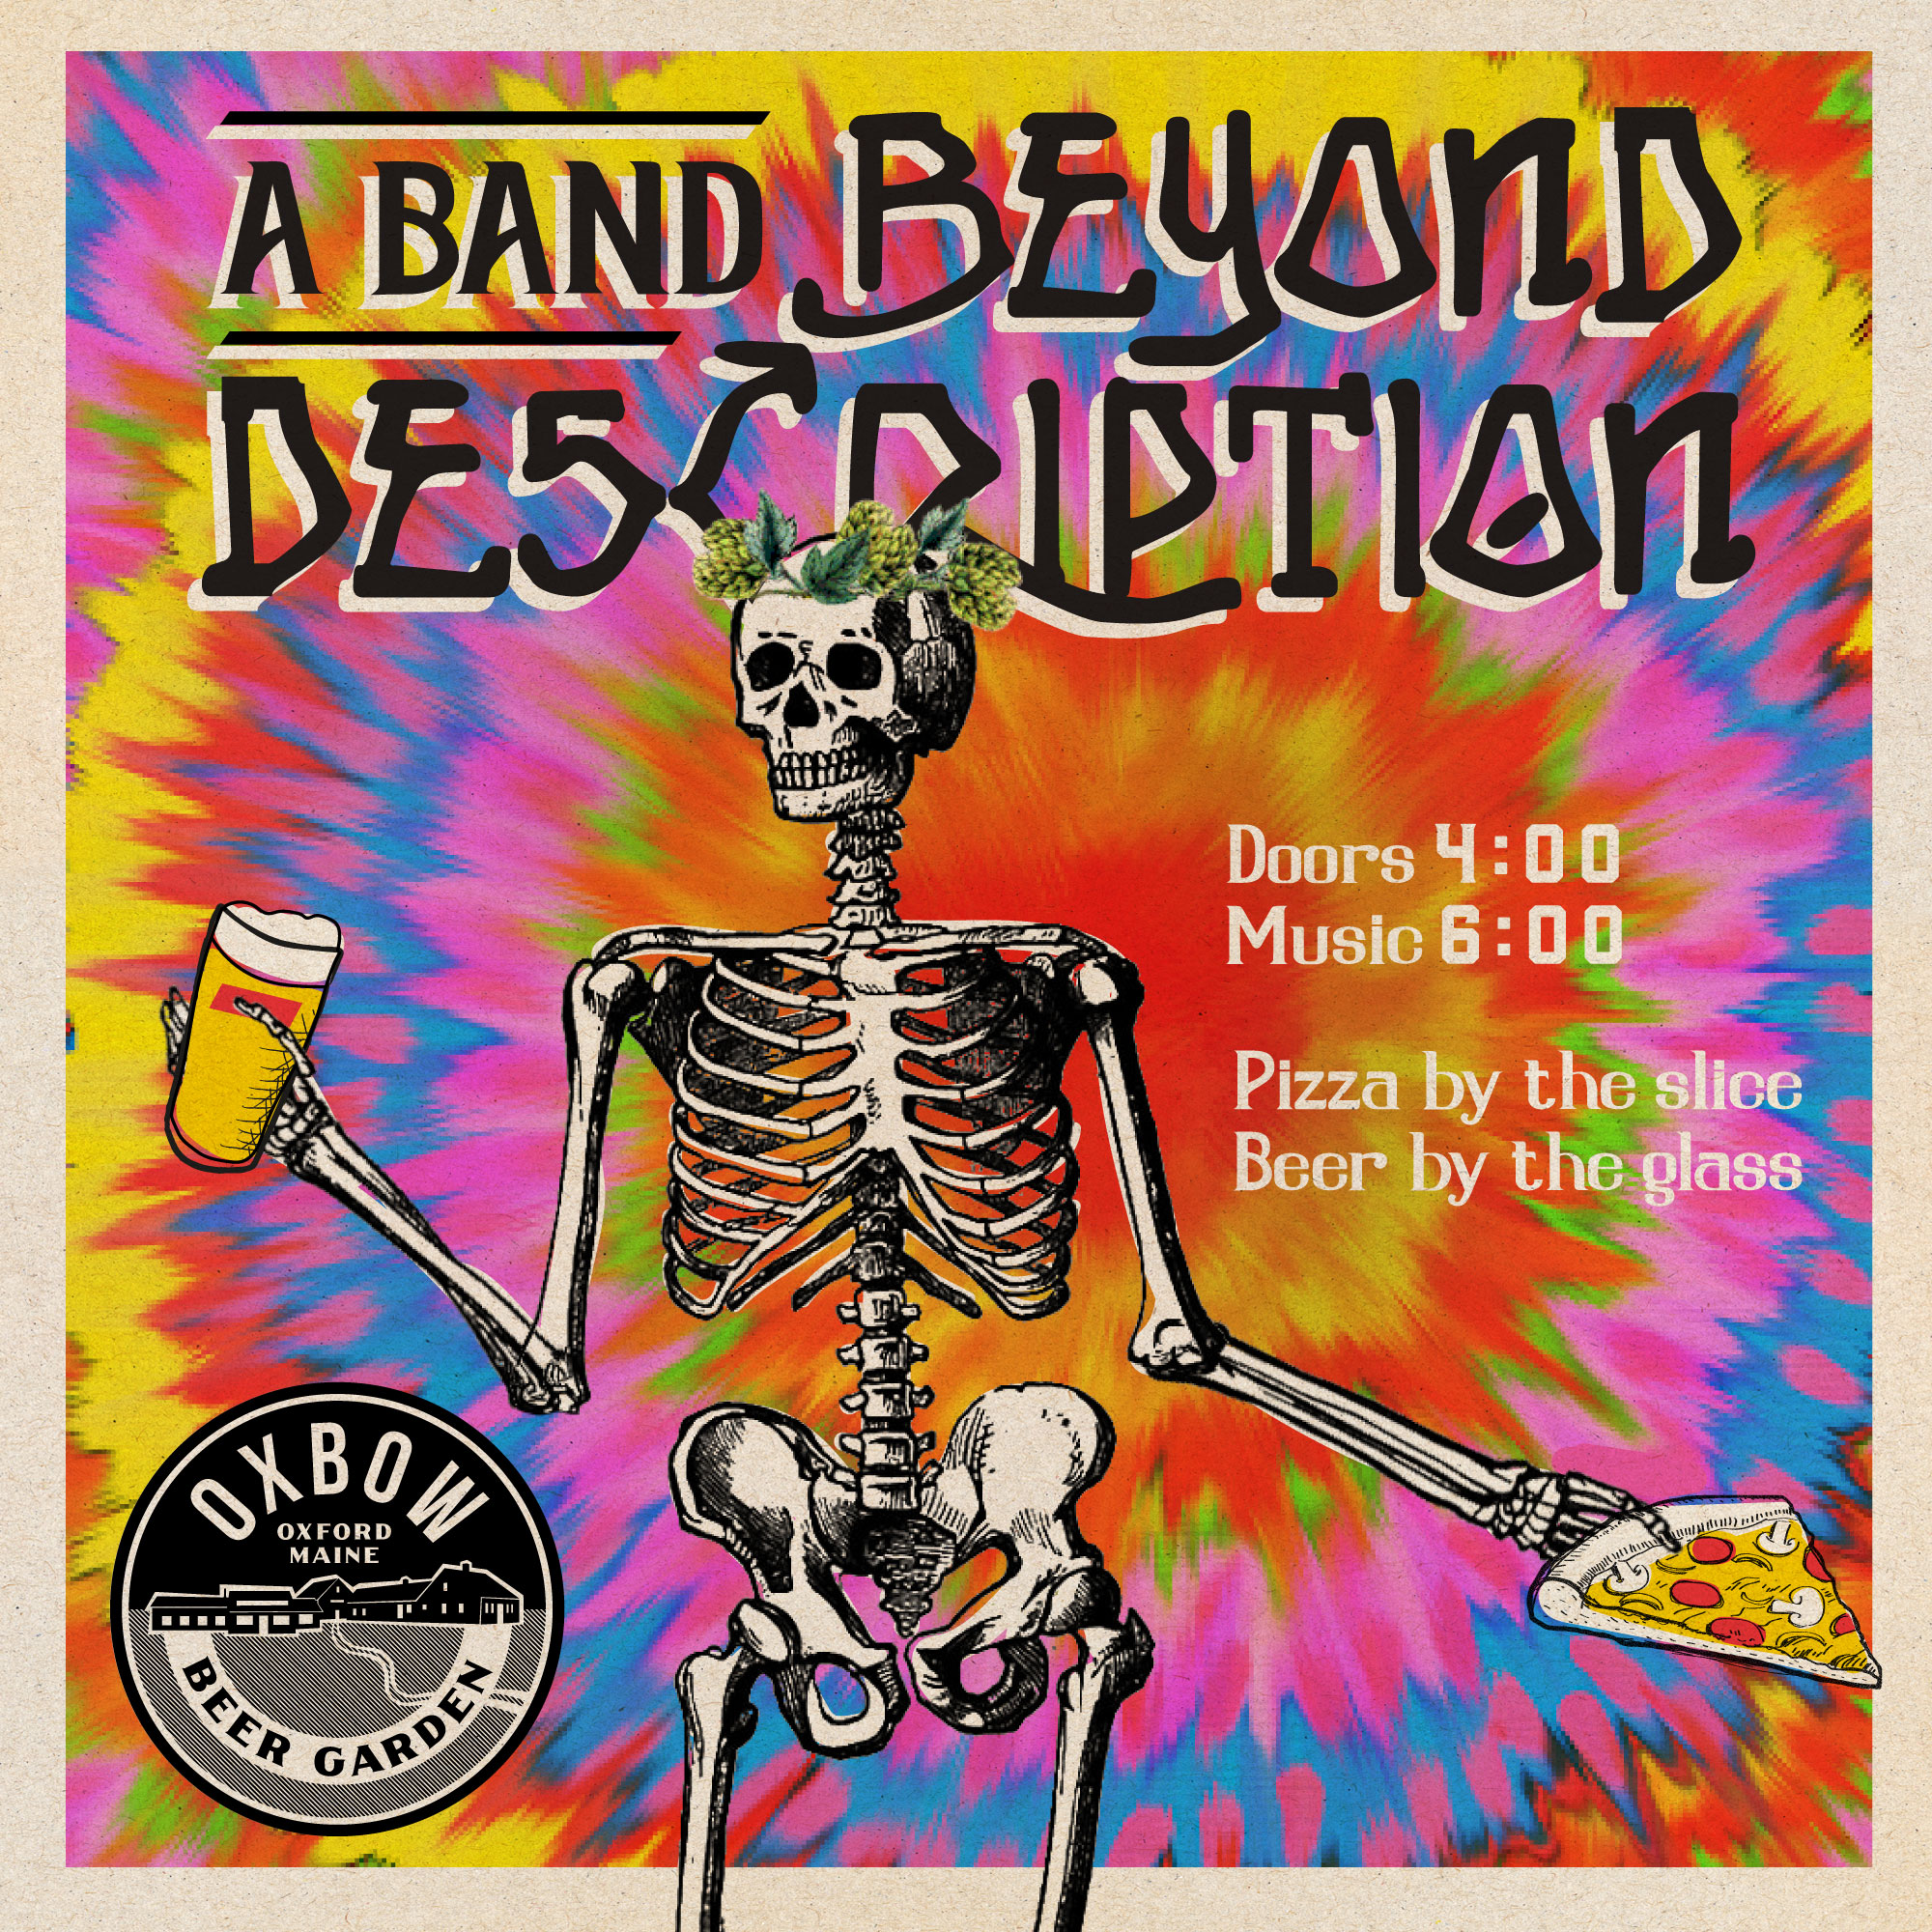 A Band Beyond Description | Oxbow Brewing Company